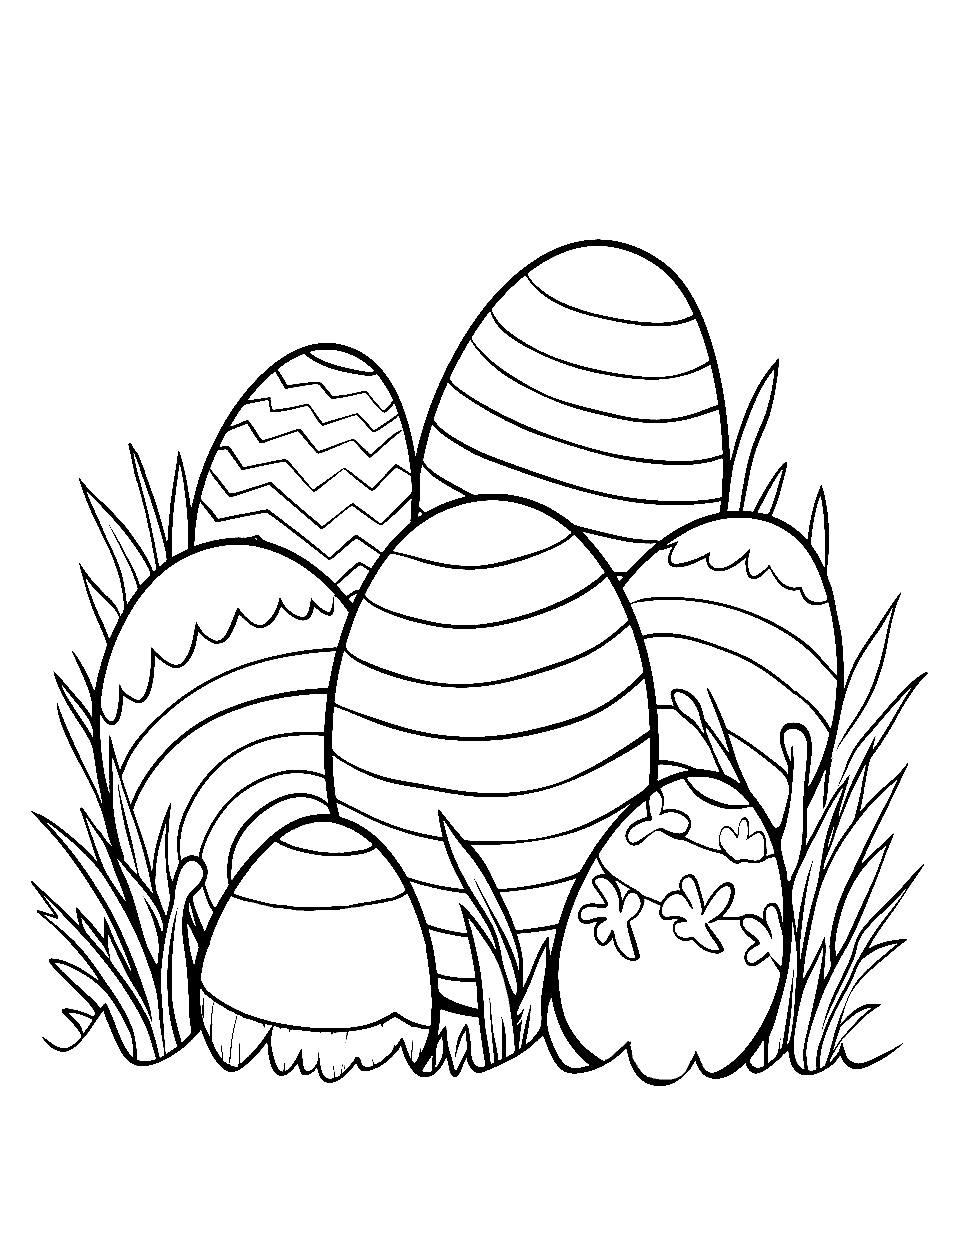 Easter Eggs Coloring Page - Decorated Easter eggs lying in the grass.